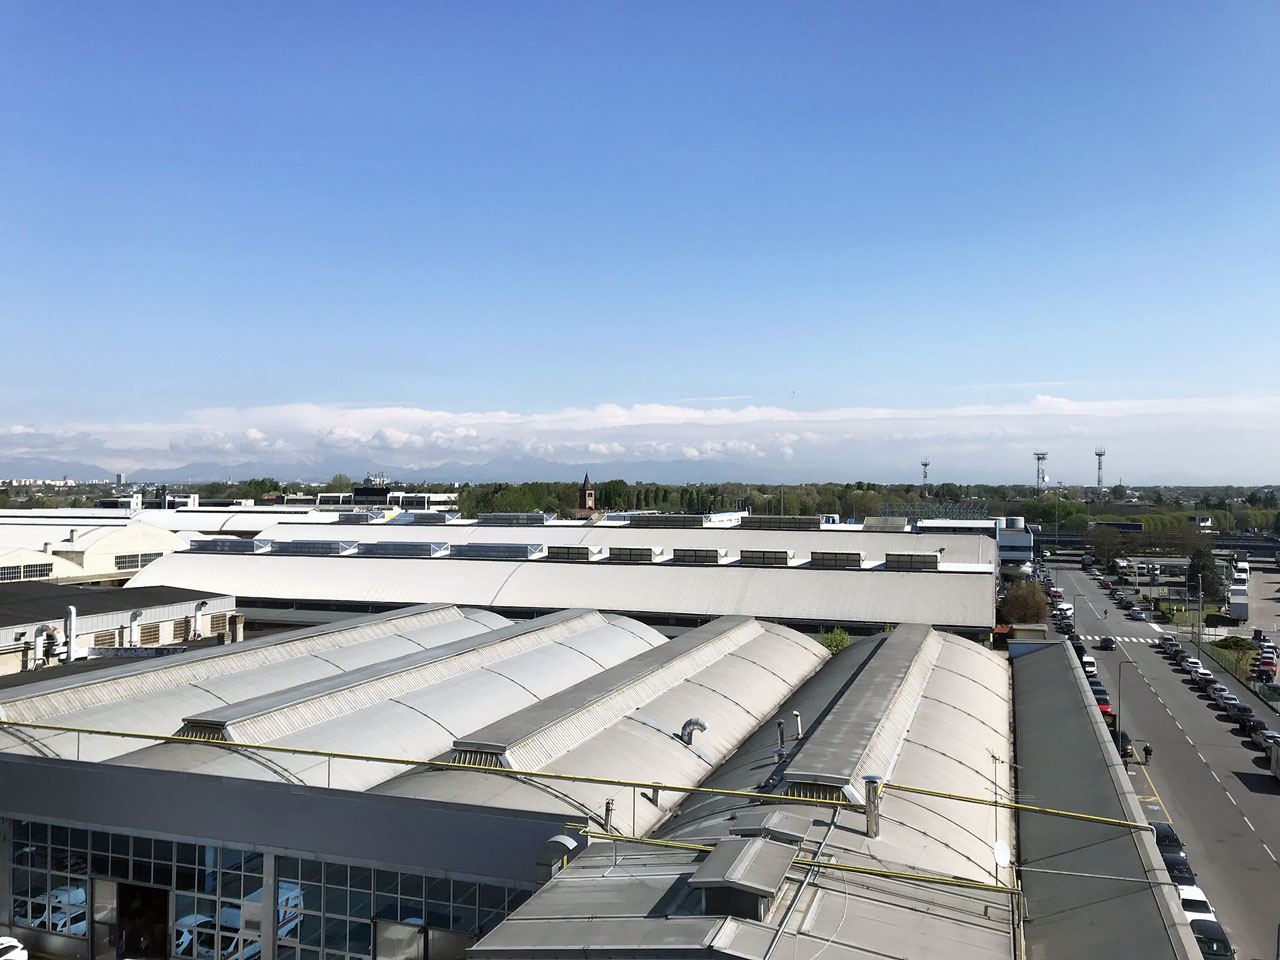 View from the terrace to Linate Airport and beyond